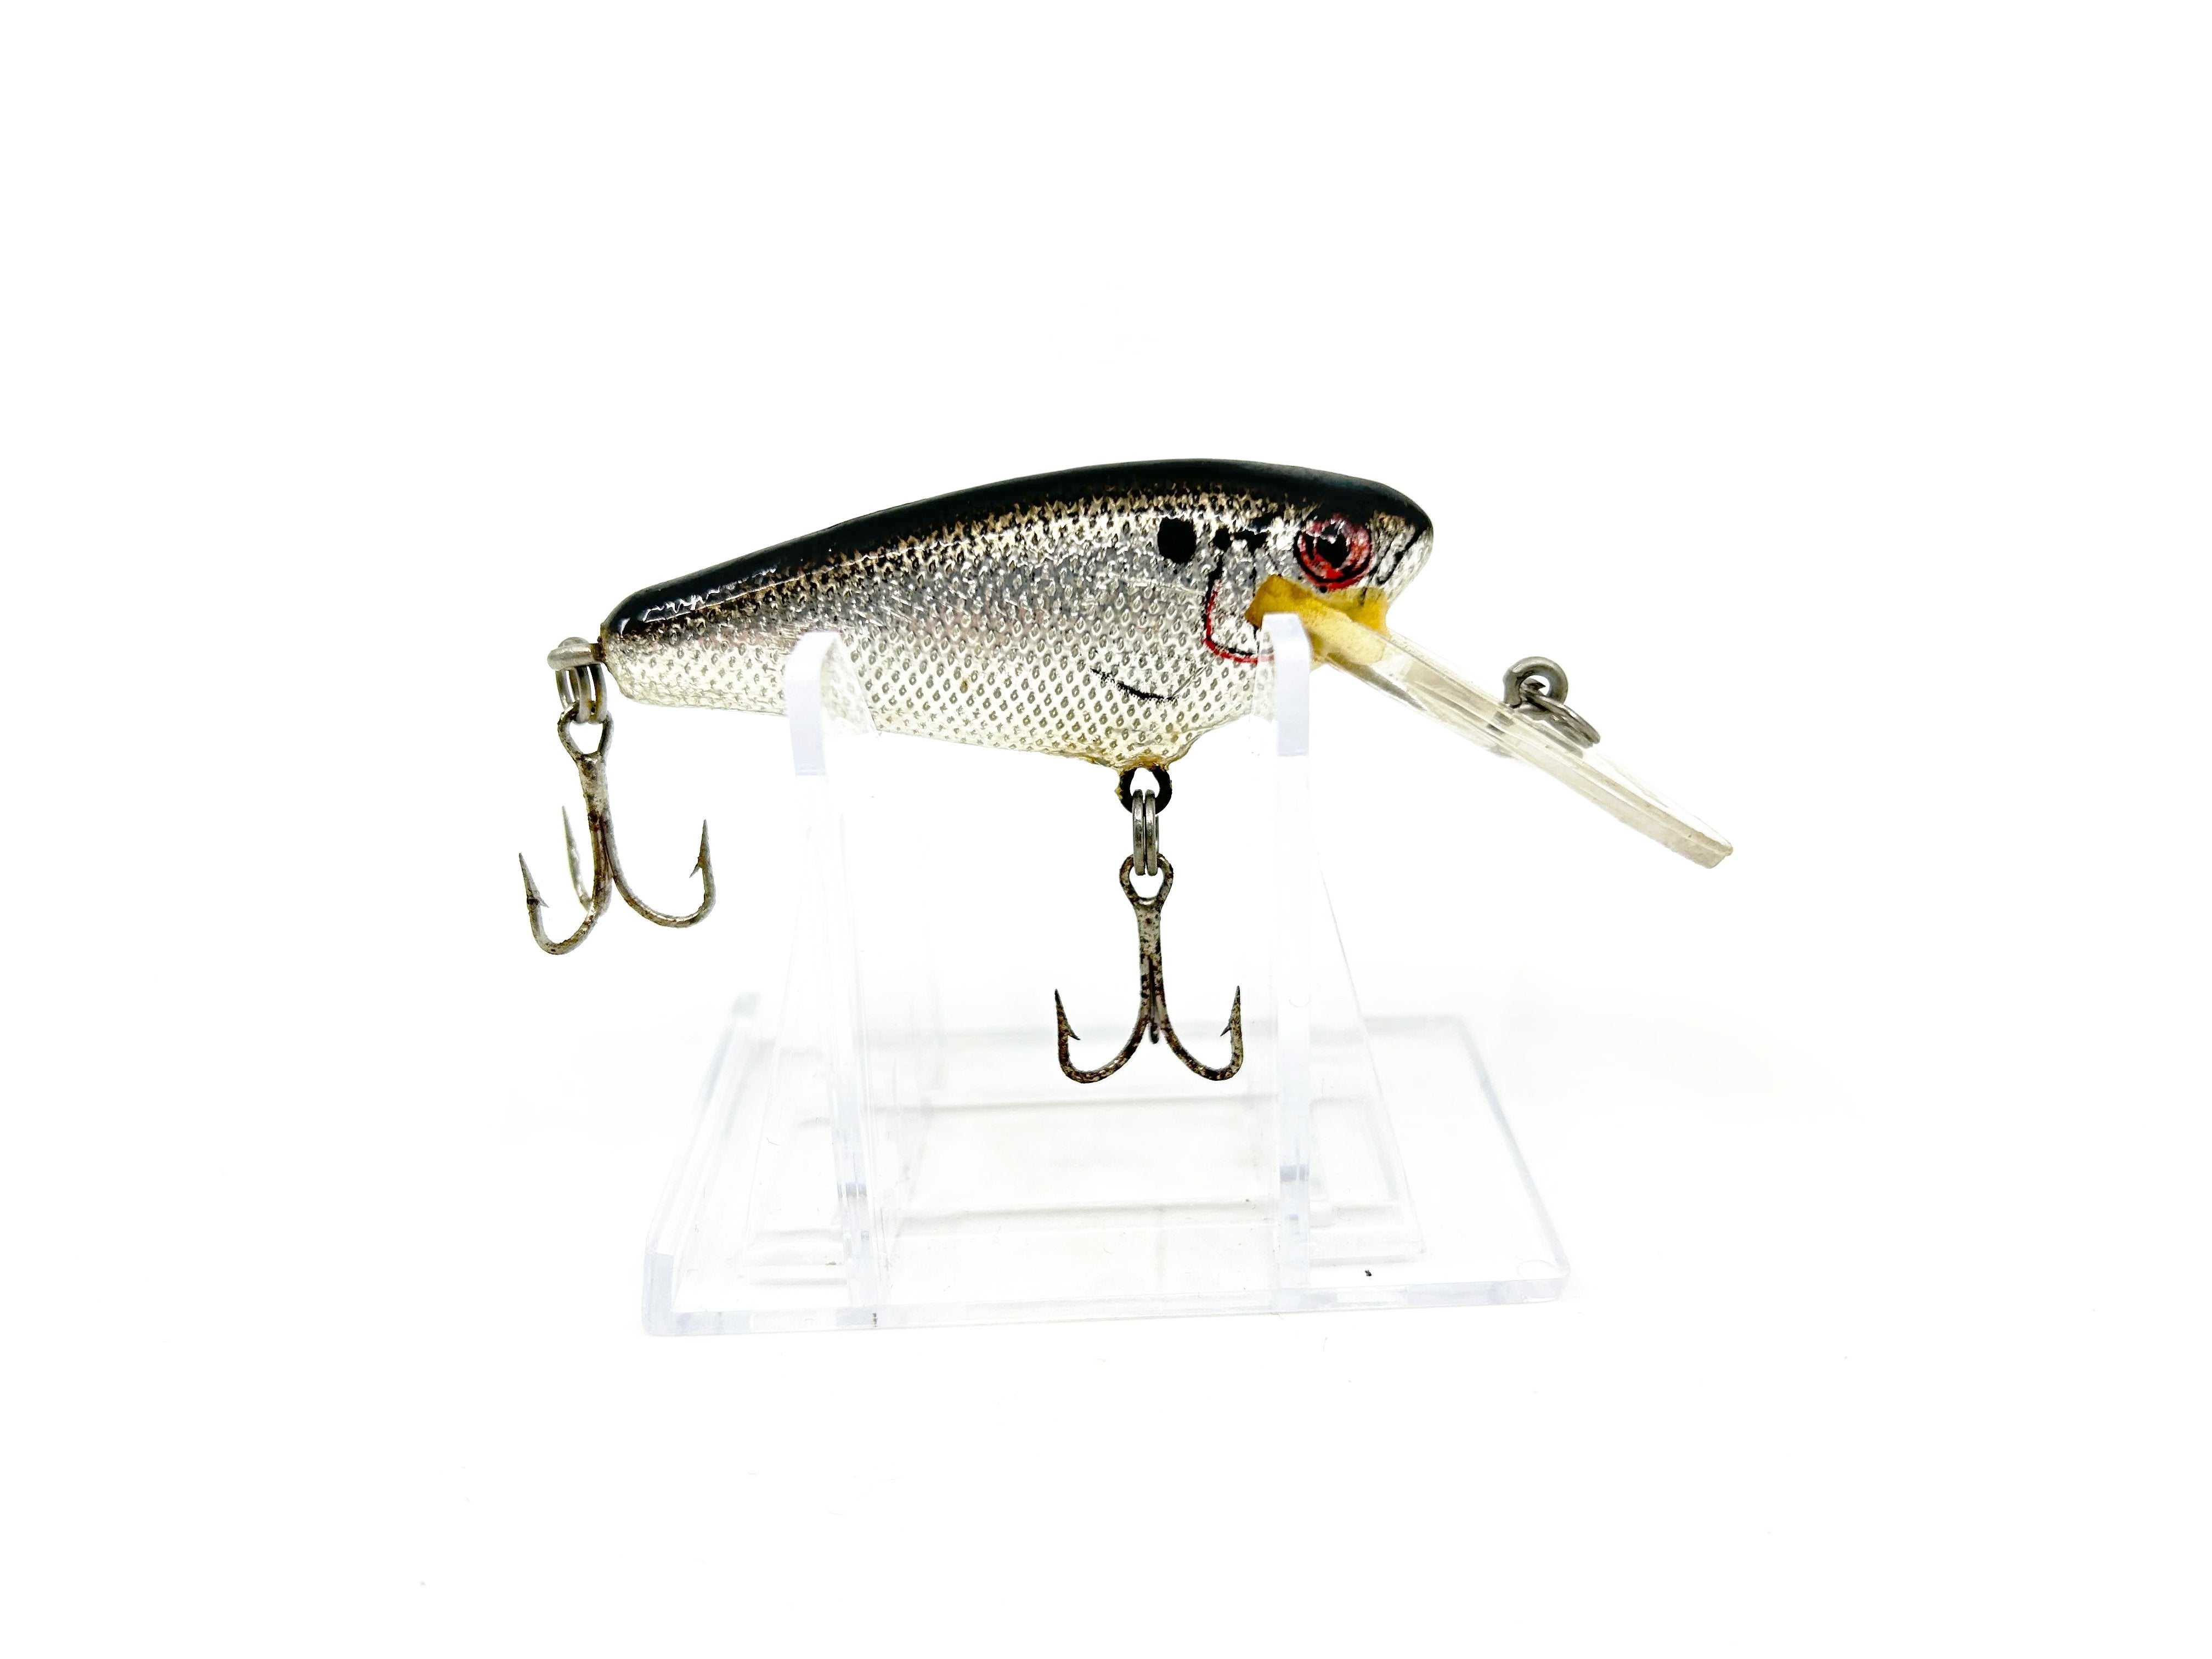 Bagley Small Fry Shad Deep Diving Lip - Vintage Bait - Silver Foil